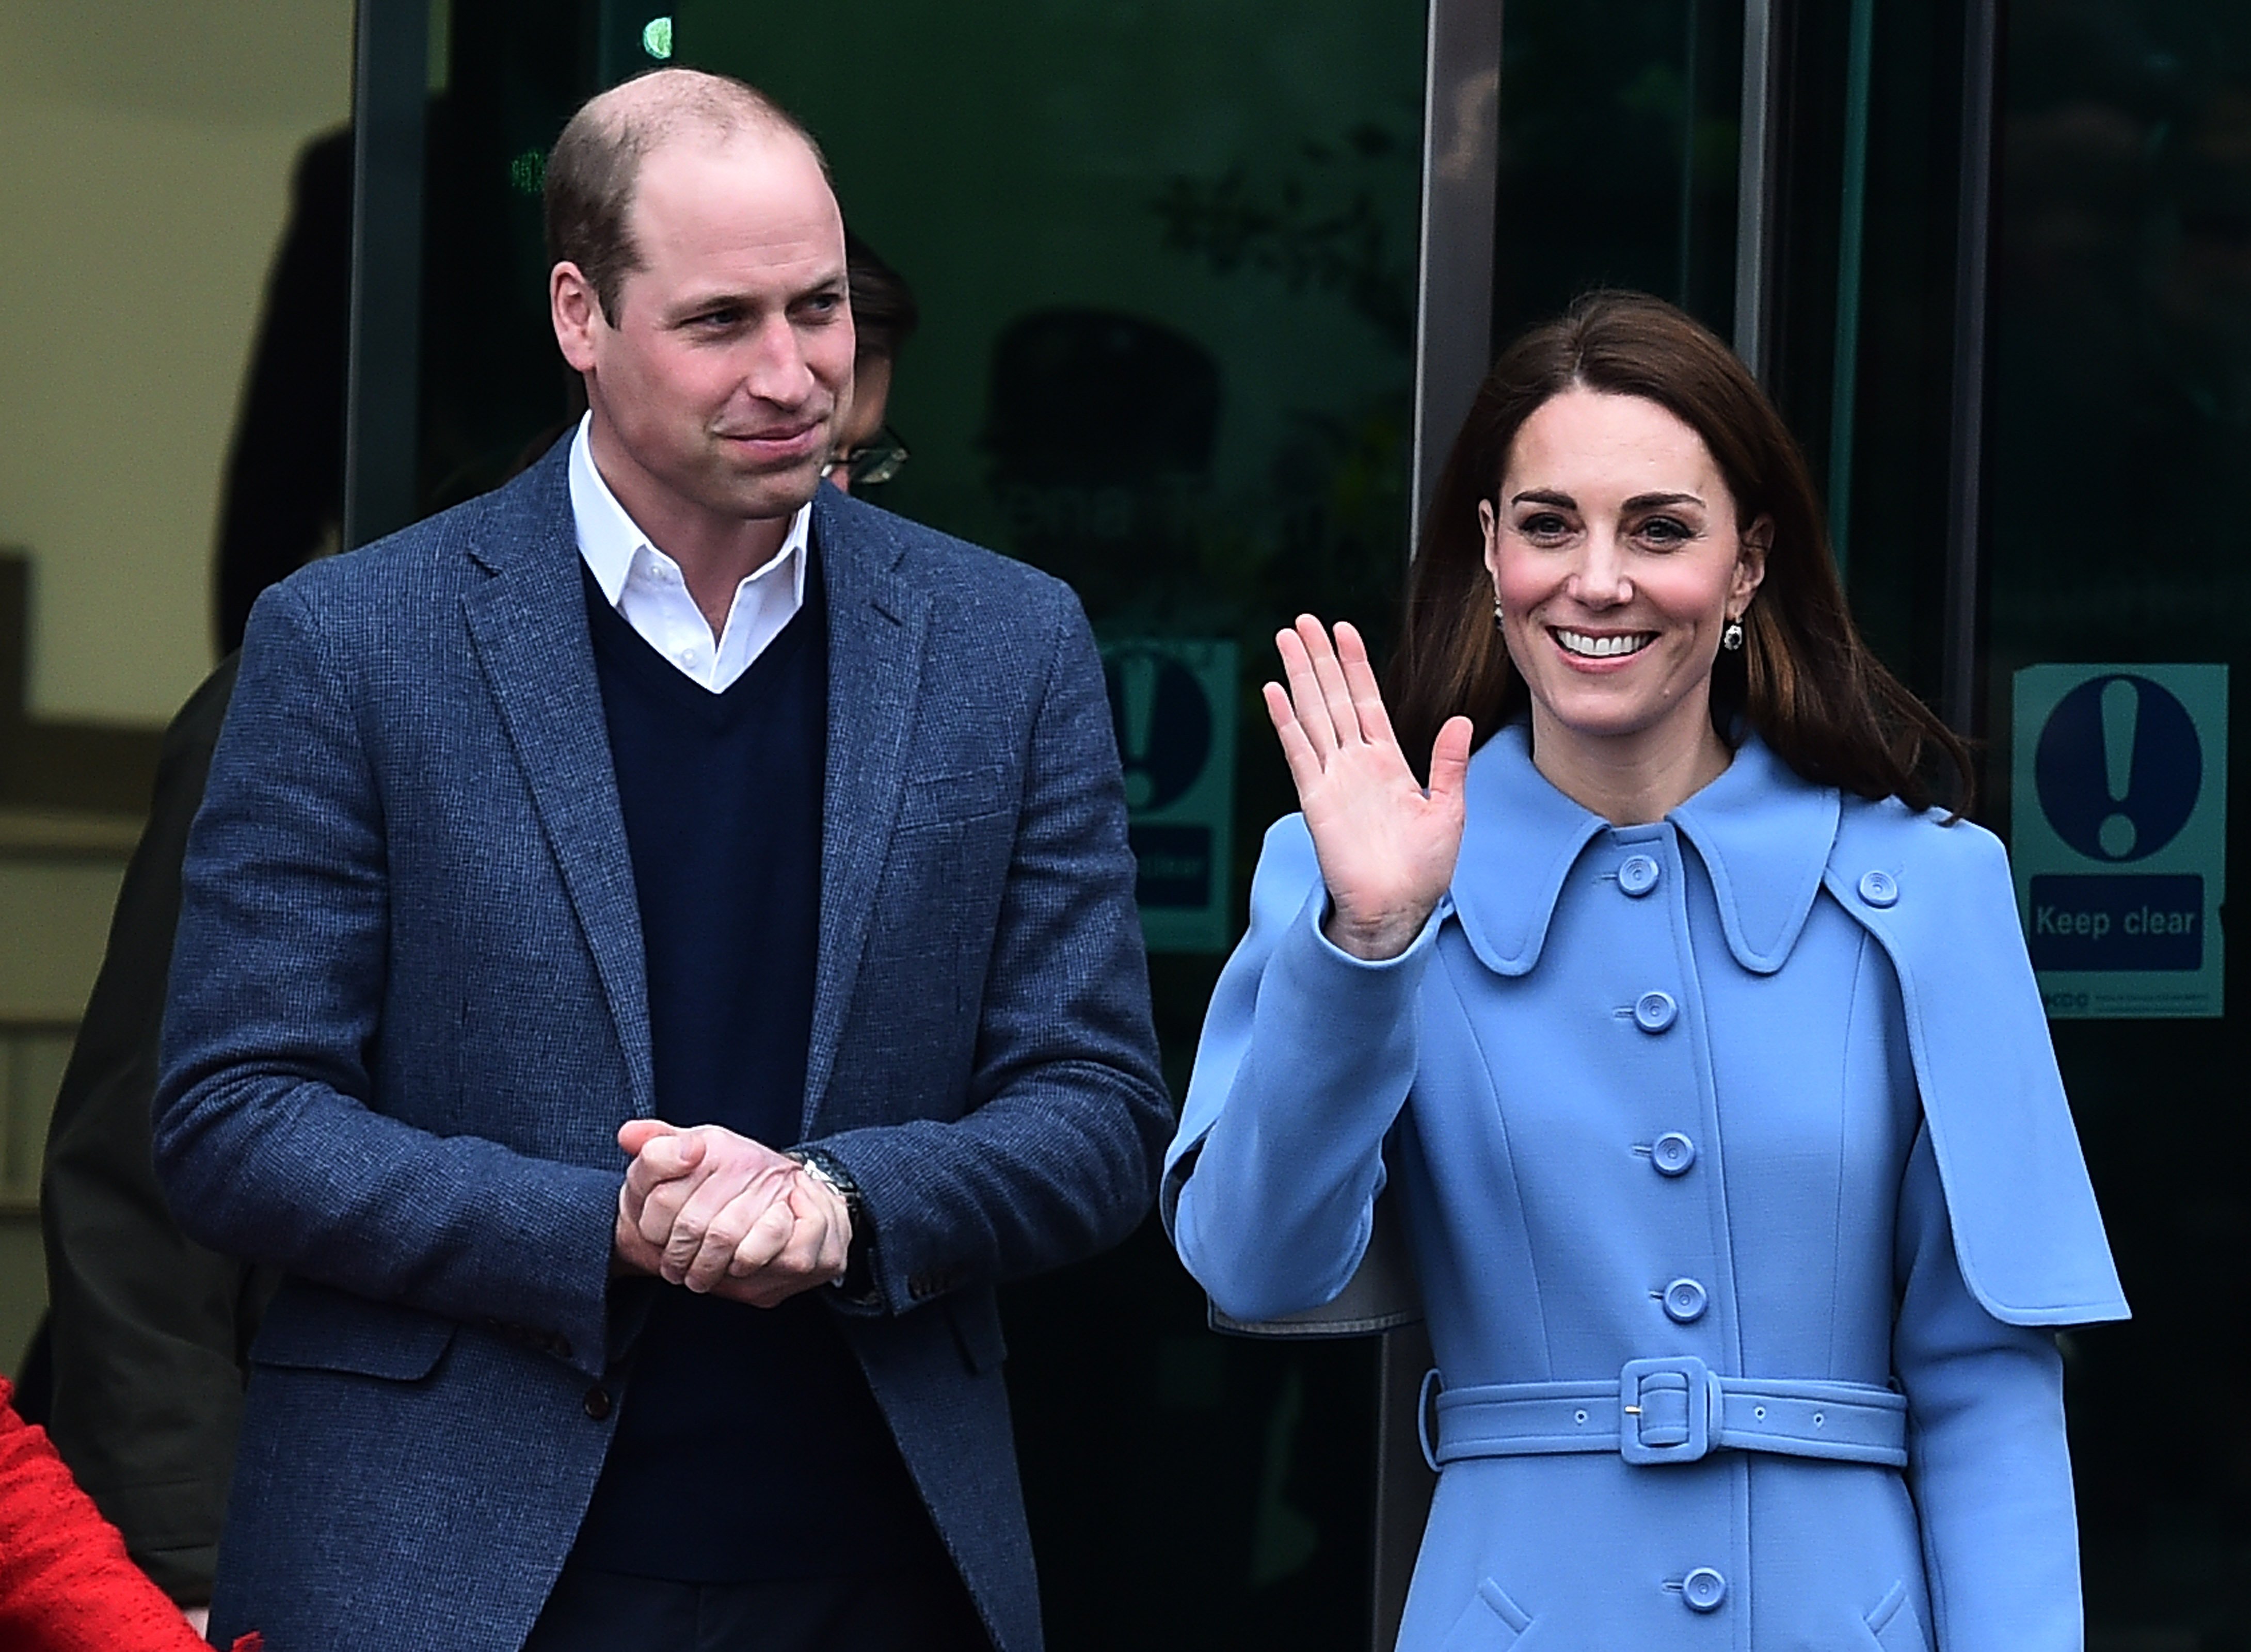 Prince William and Kate Middleton acknowledge crowd ahead of walkabout in Ballymena town centre in Ballymena, Northern Ireland